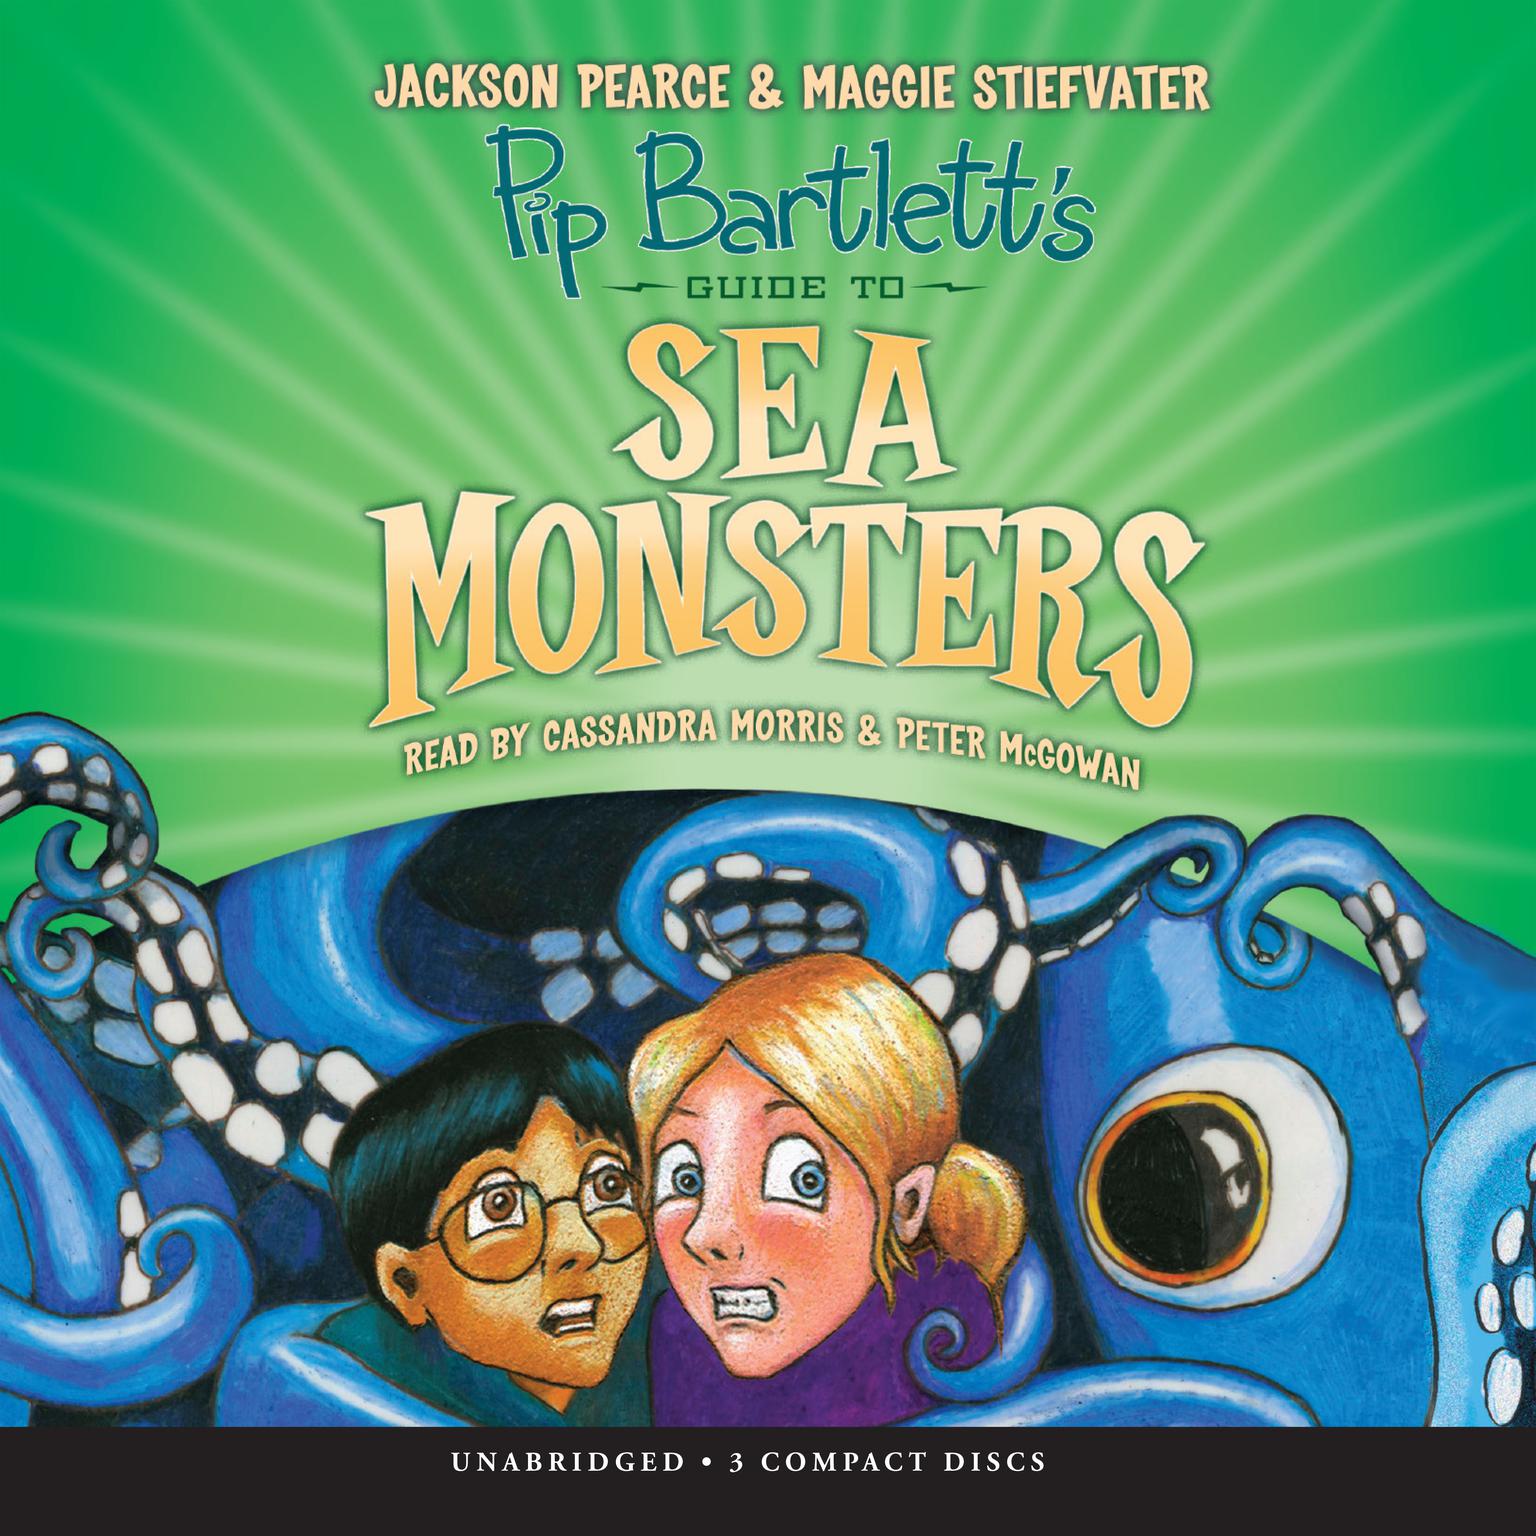 Pip Bartletts Guide to Sea Monsters Audiobook, by Jackson Pearce